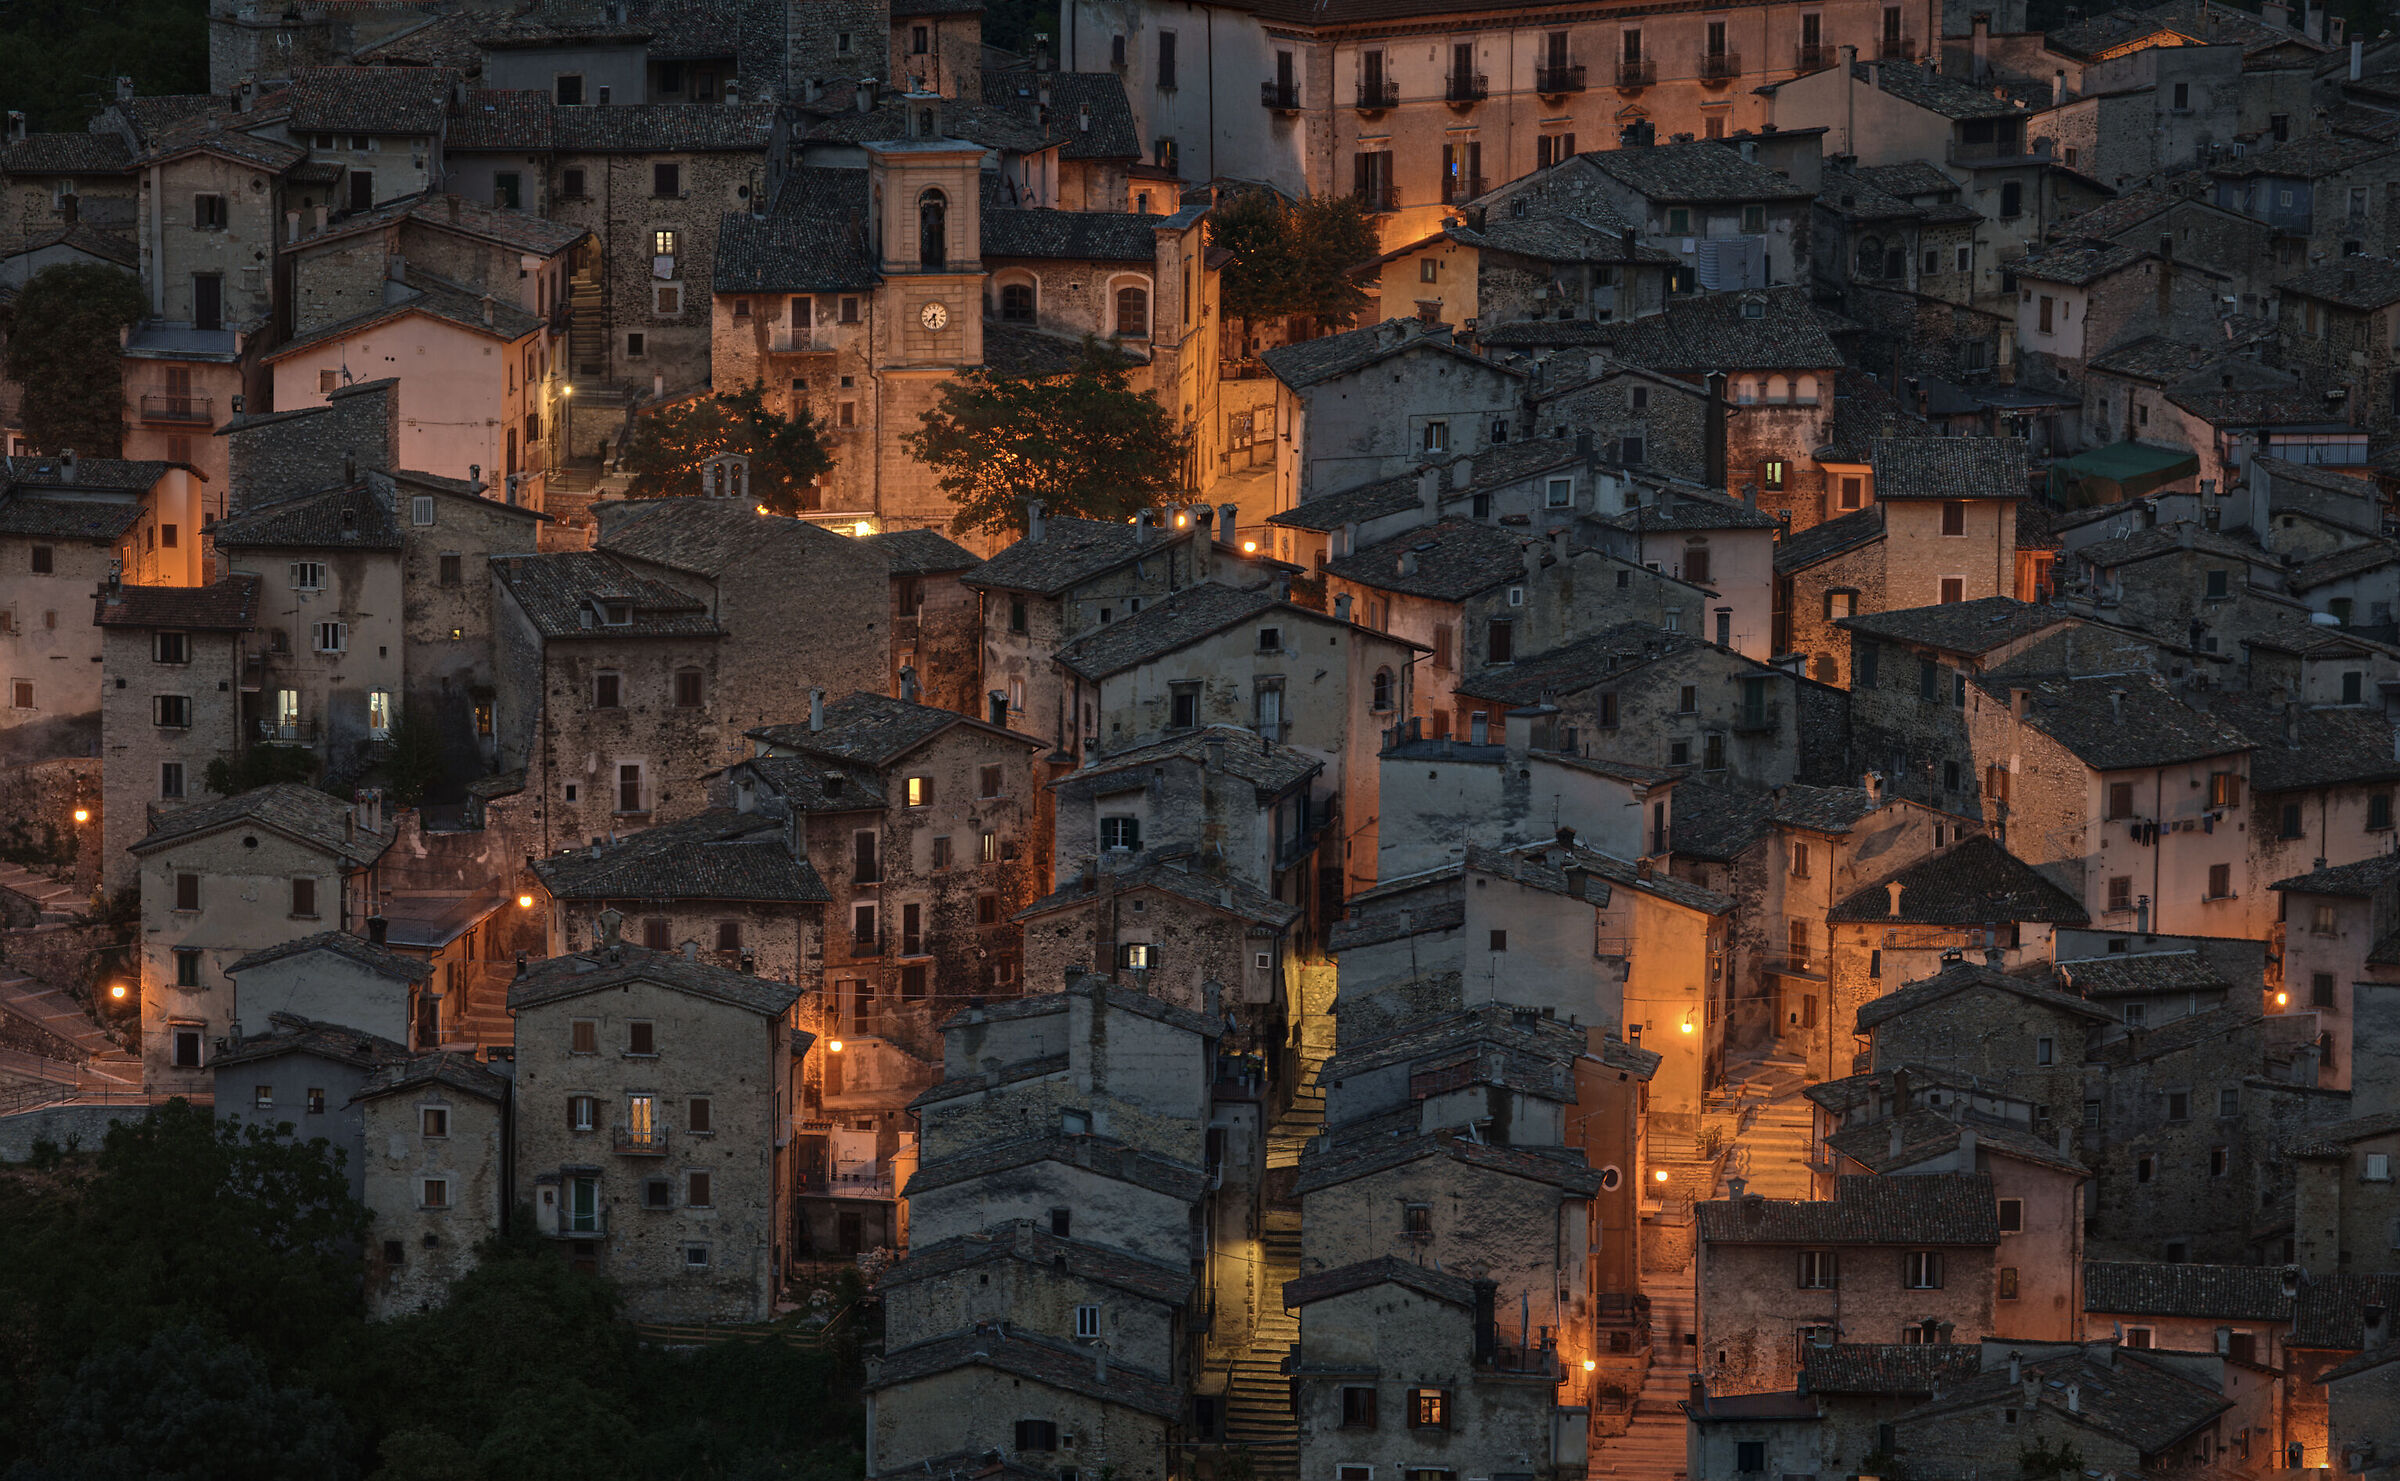 Scanno by night...